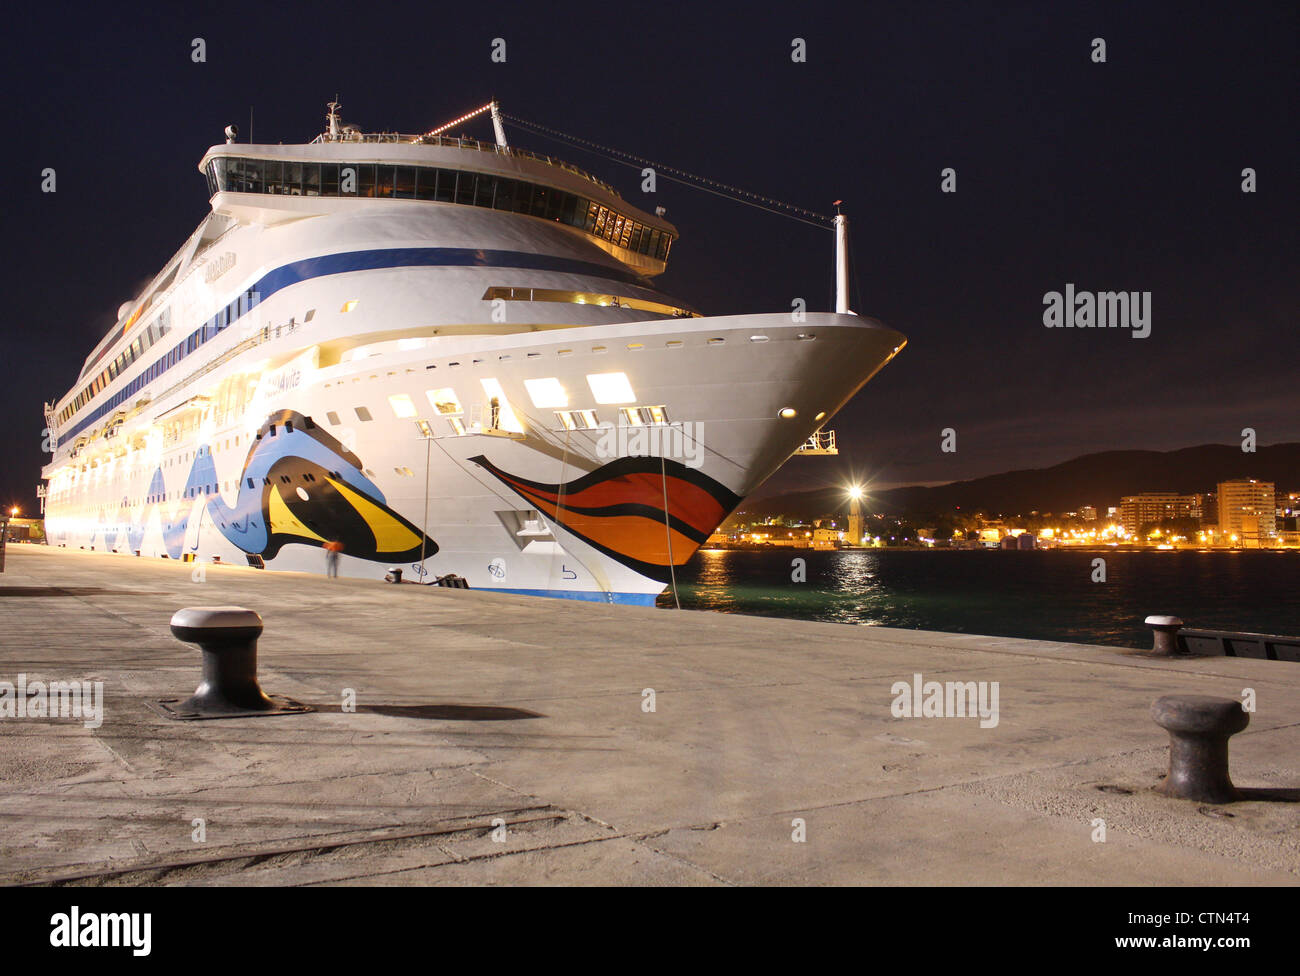 Cruise Ship Aidavita - during night departure from the Port of Palma de Mallorca - mooring lines cast off - Balearic Islands, Sp Stock Photo